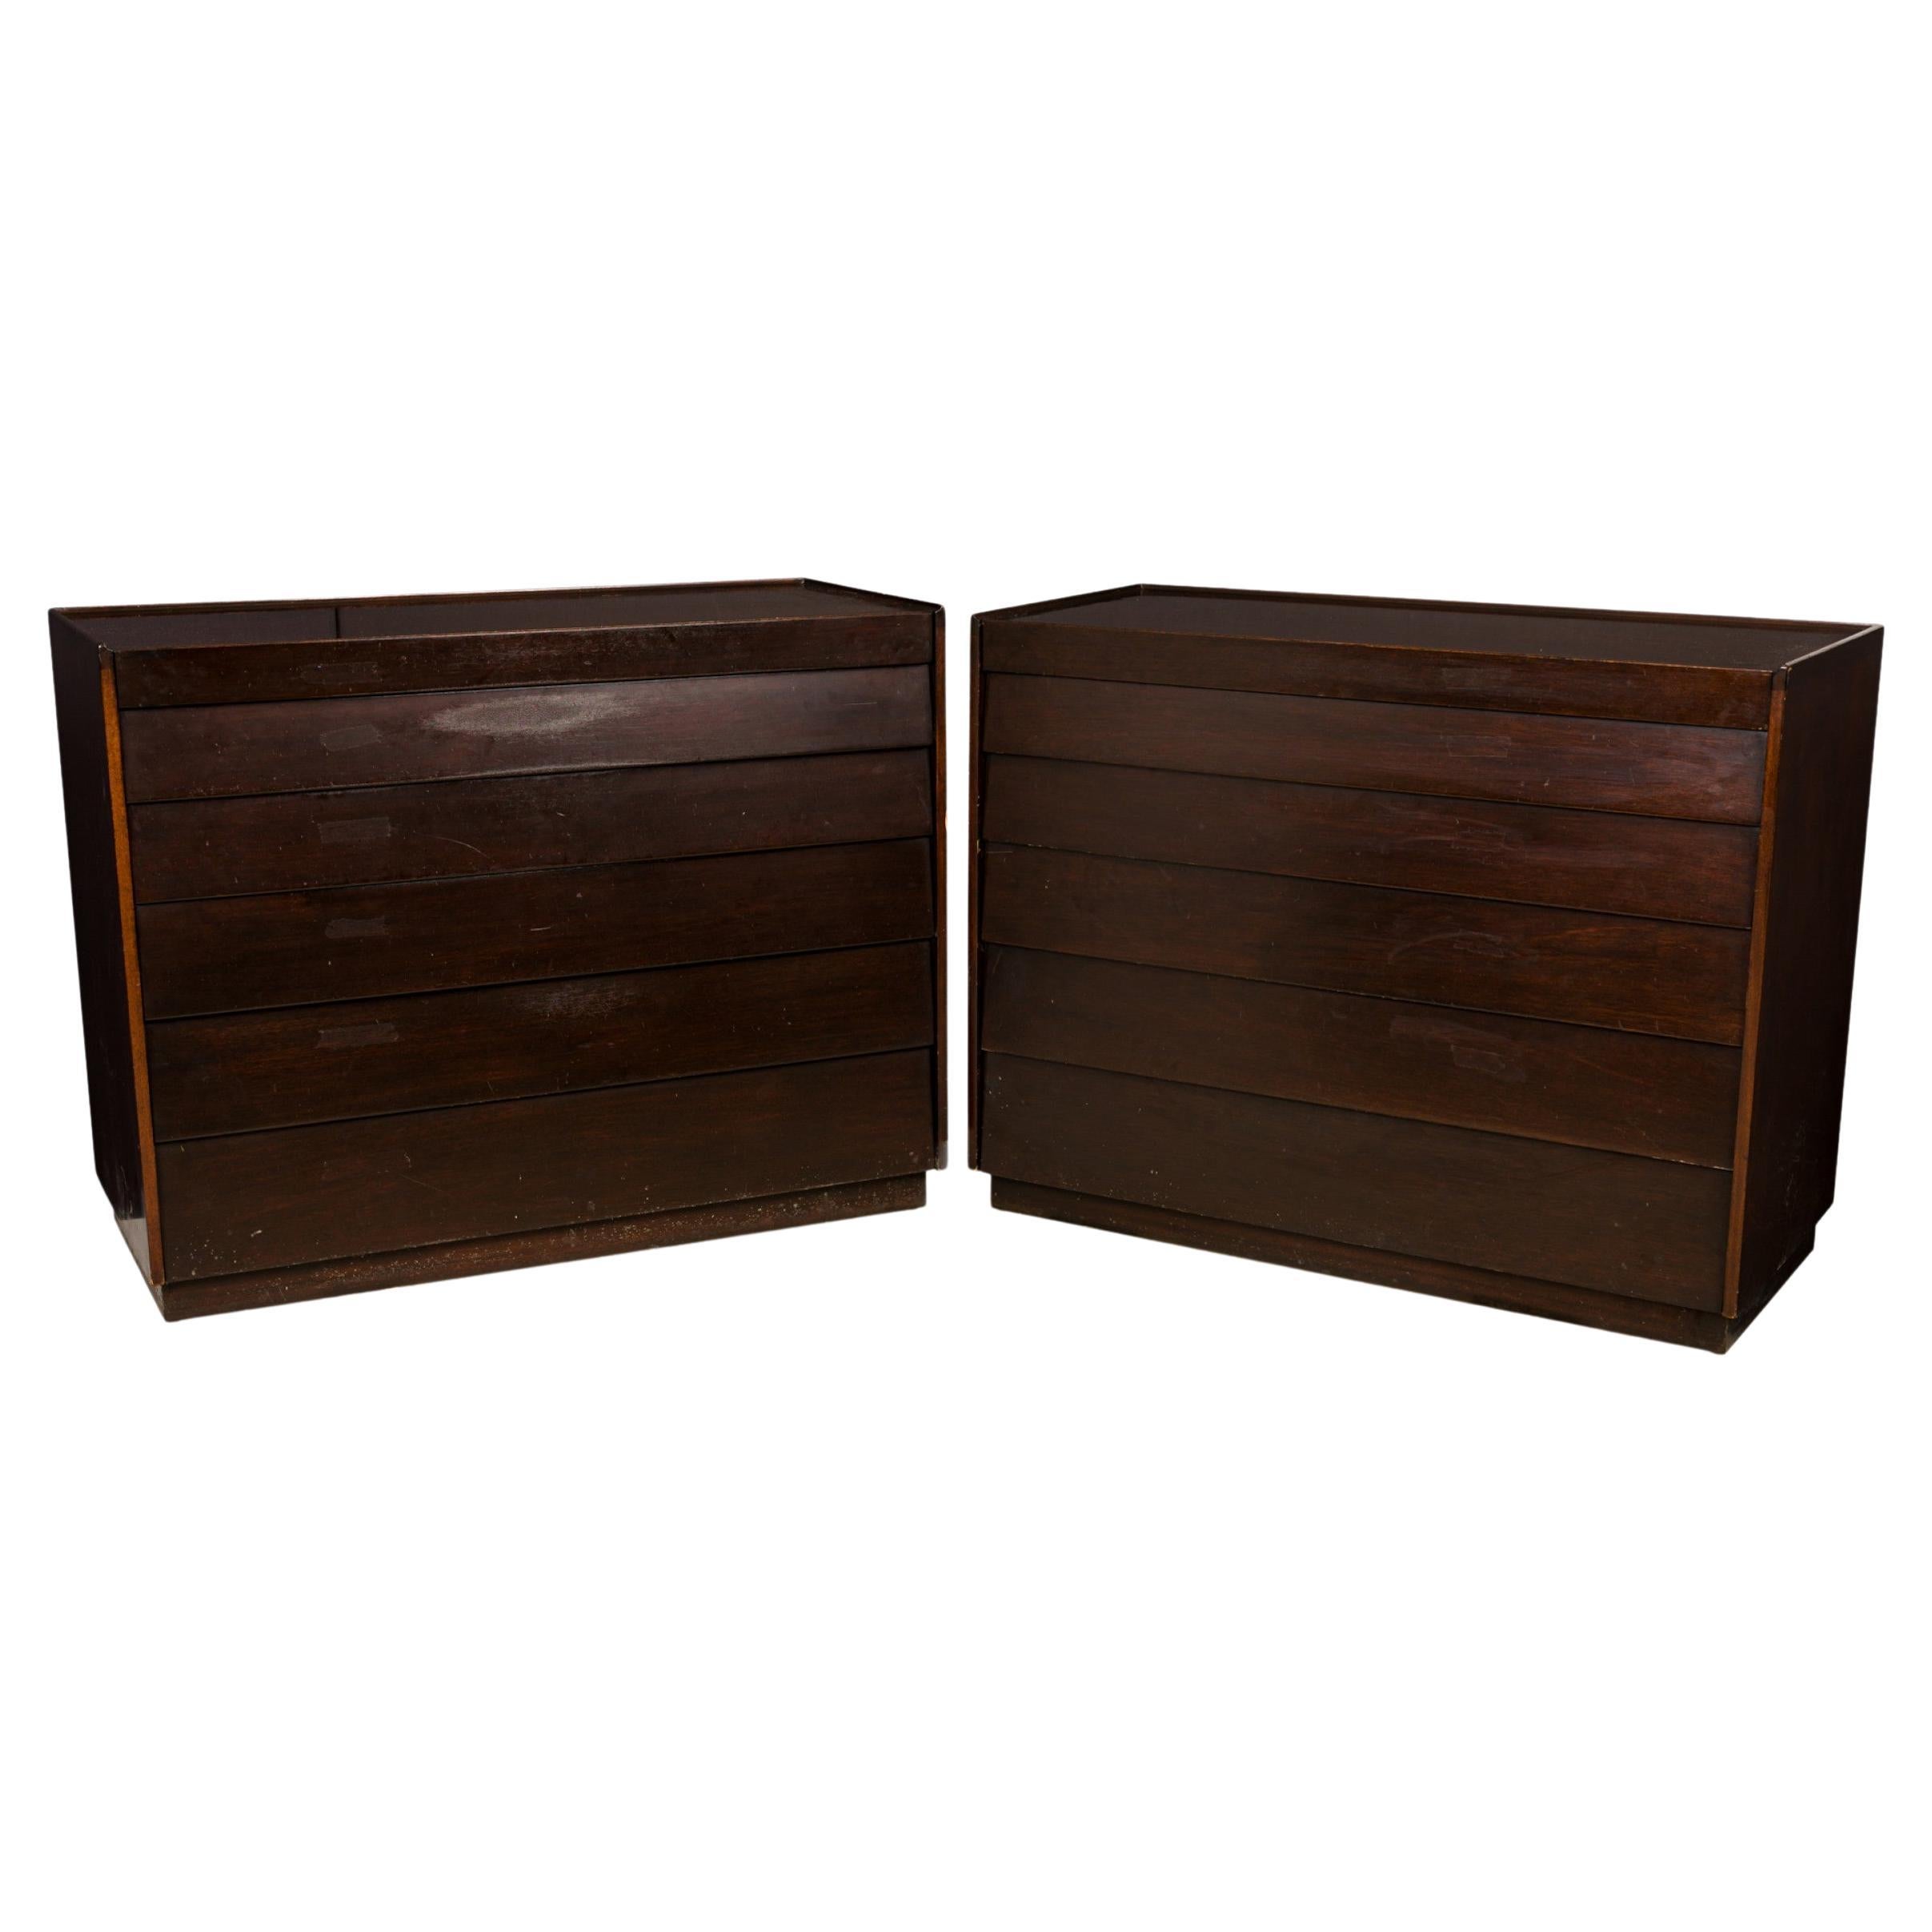 Pair of Edward Wormley for Dunbar Dark Wood Louver Front Commodes / Chests For Sale